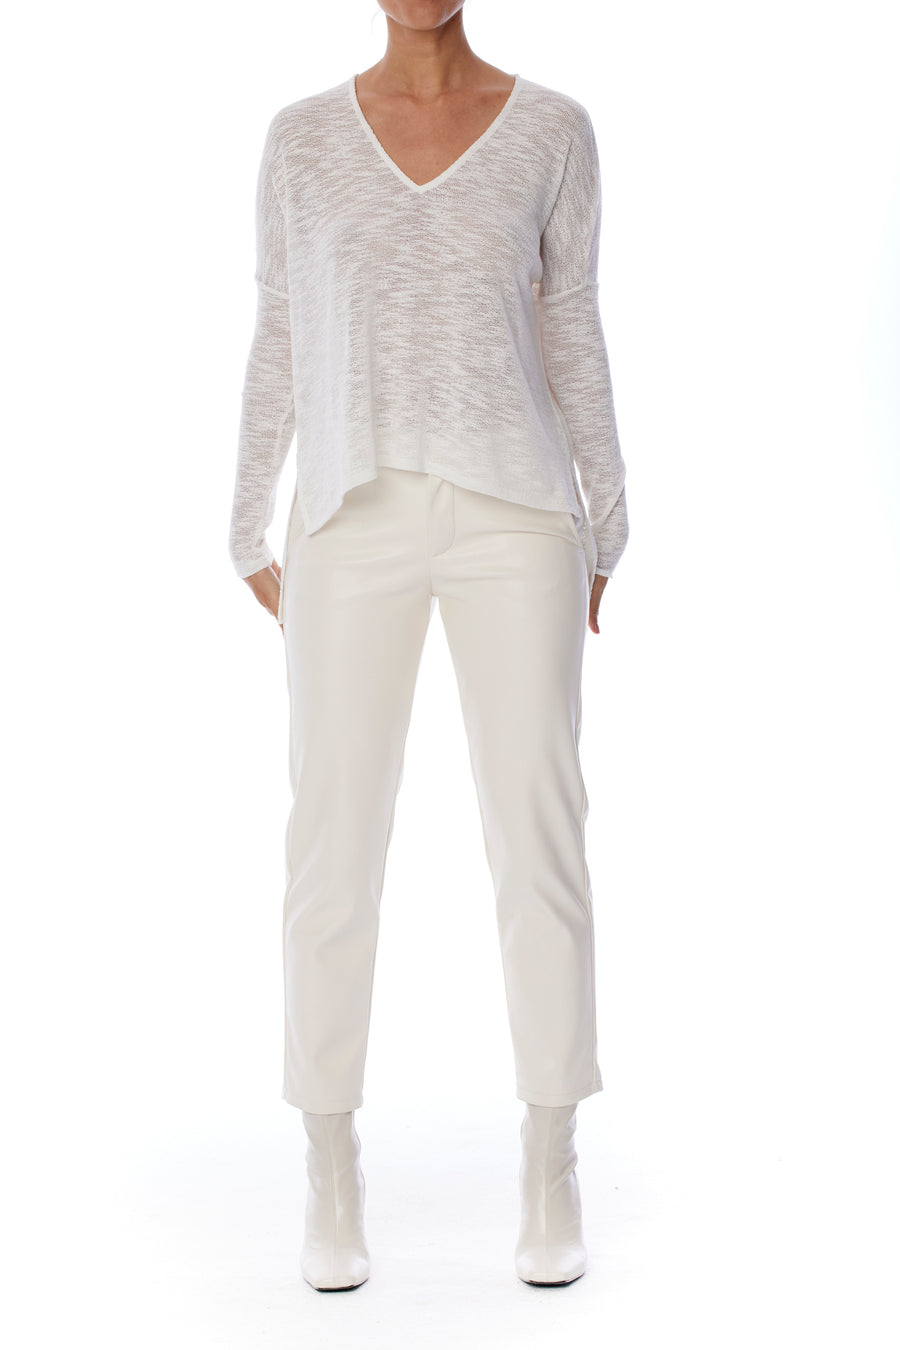 Relaxed fit, lightweight sweater with V-neck, long sleeves and a drop shoulder hem in white